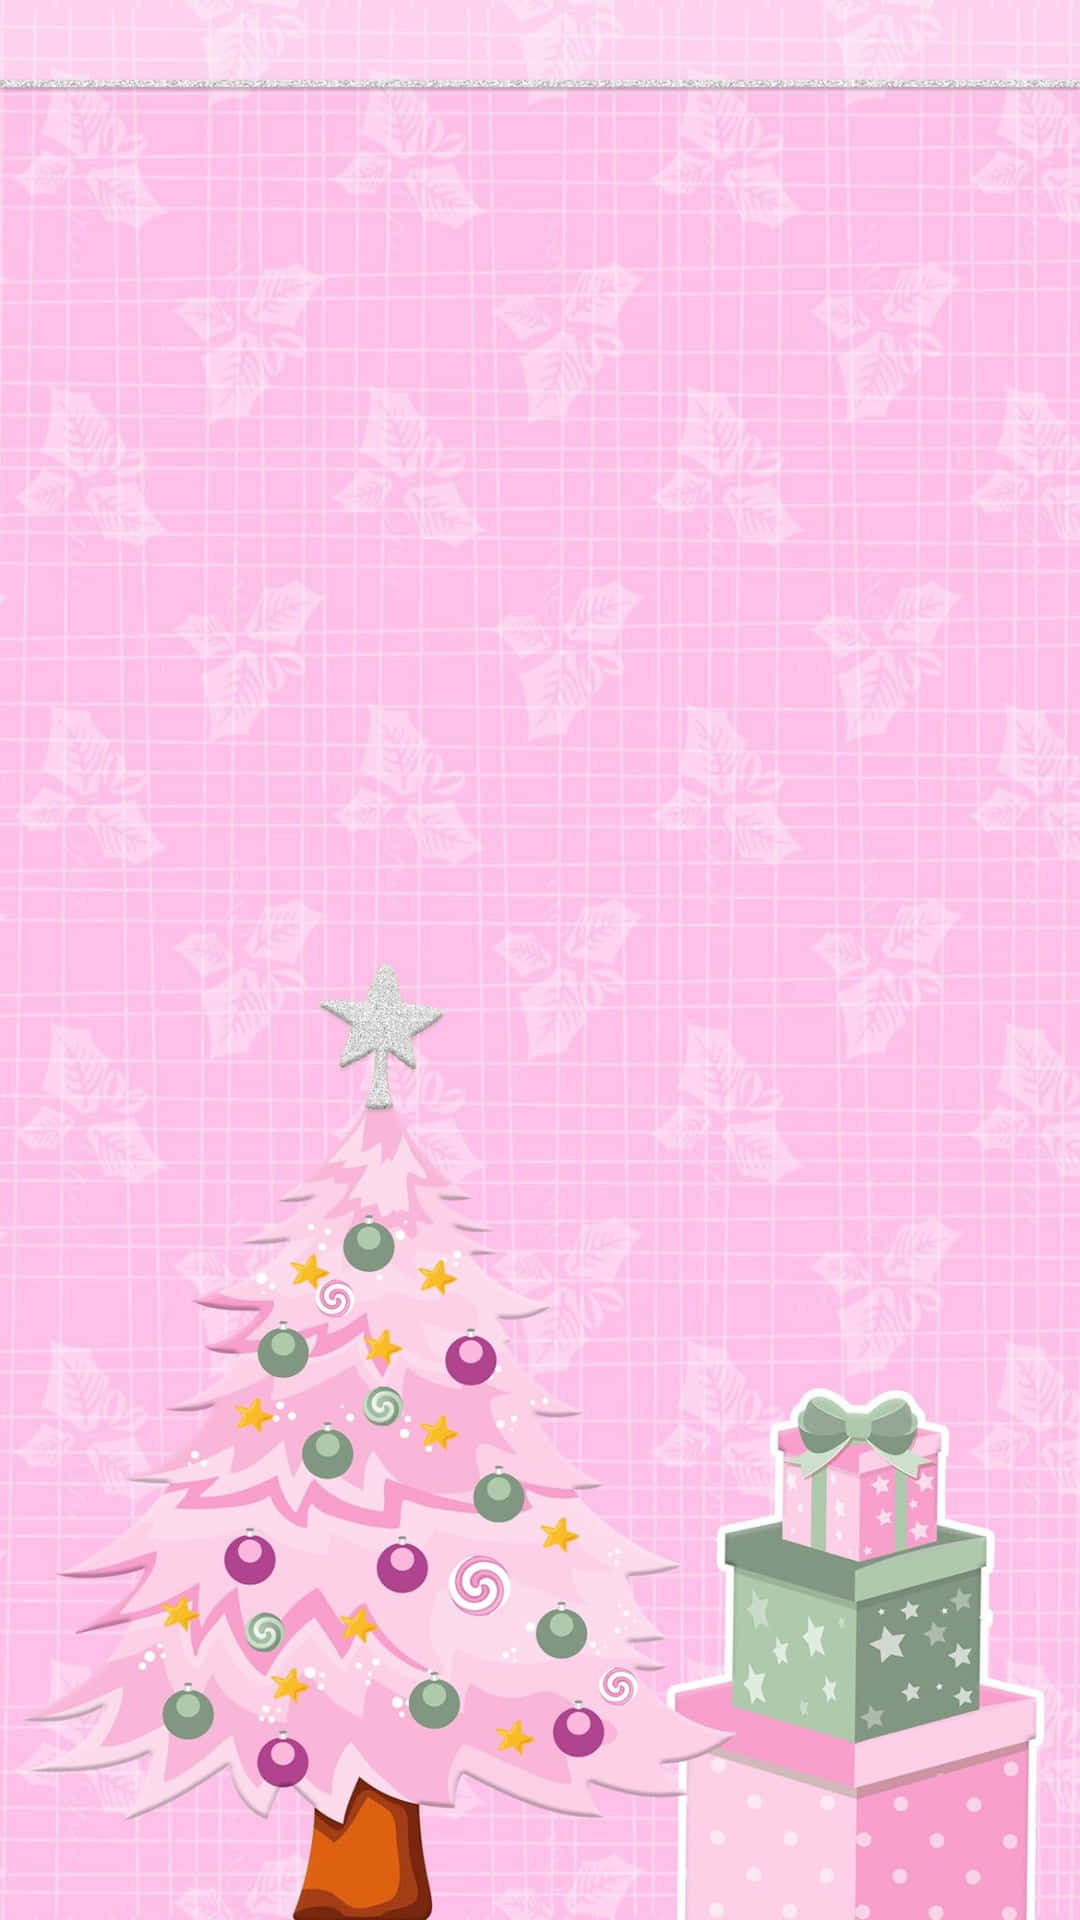 Spread the joy of the holiday season with this cute pink Christmas image. Wallpaper